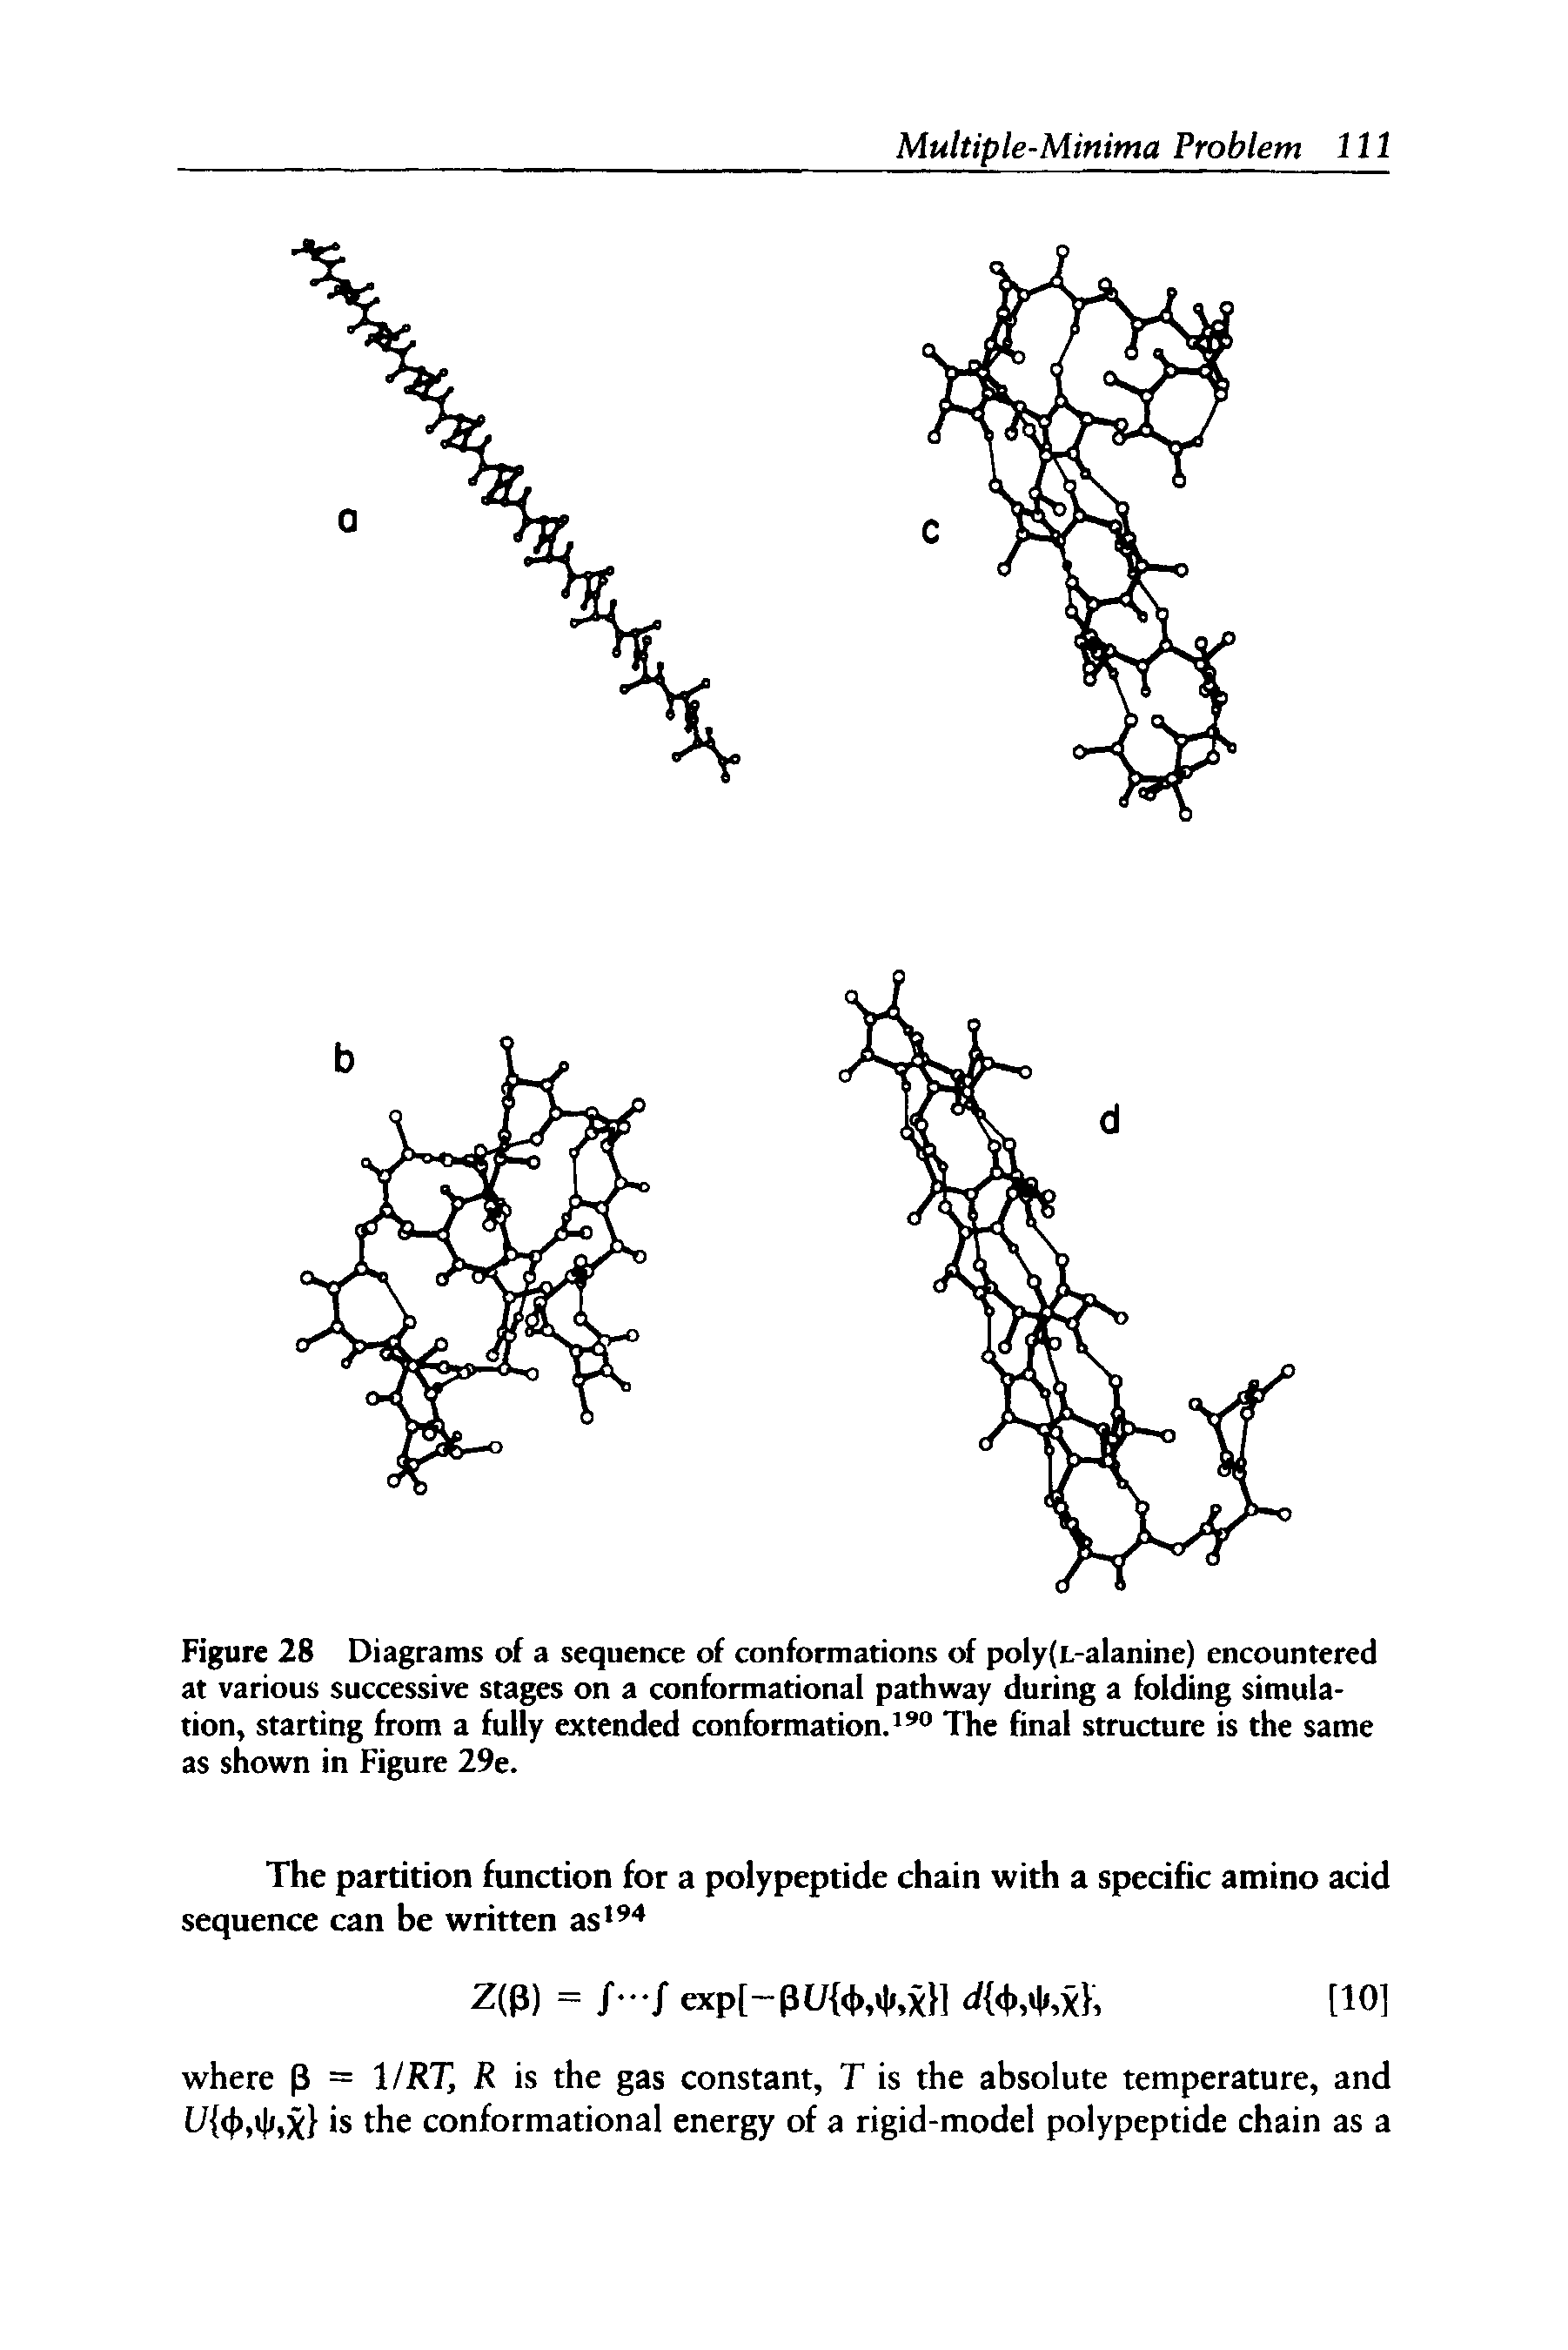 Figure 28 Diagrams of a sequence of conformations of poly(L-alanine) encountered at various successive stages on a conformational pathway during a folding simulation, starting from a fully extended conformation.190 The final structure is the same as shown in Figure 29e.